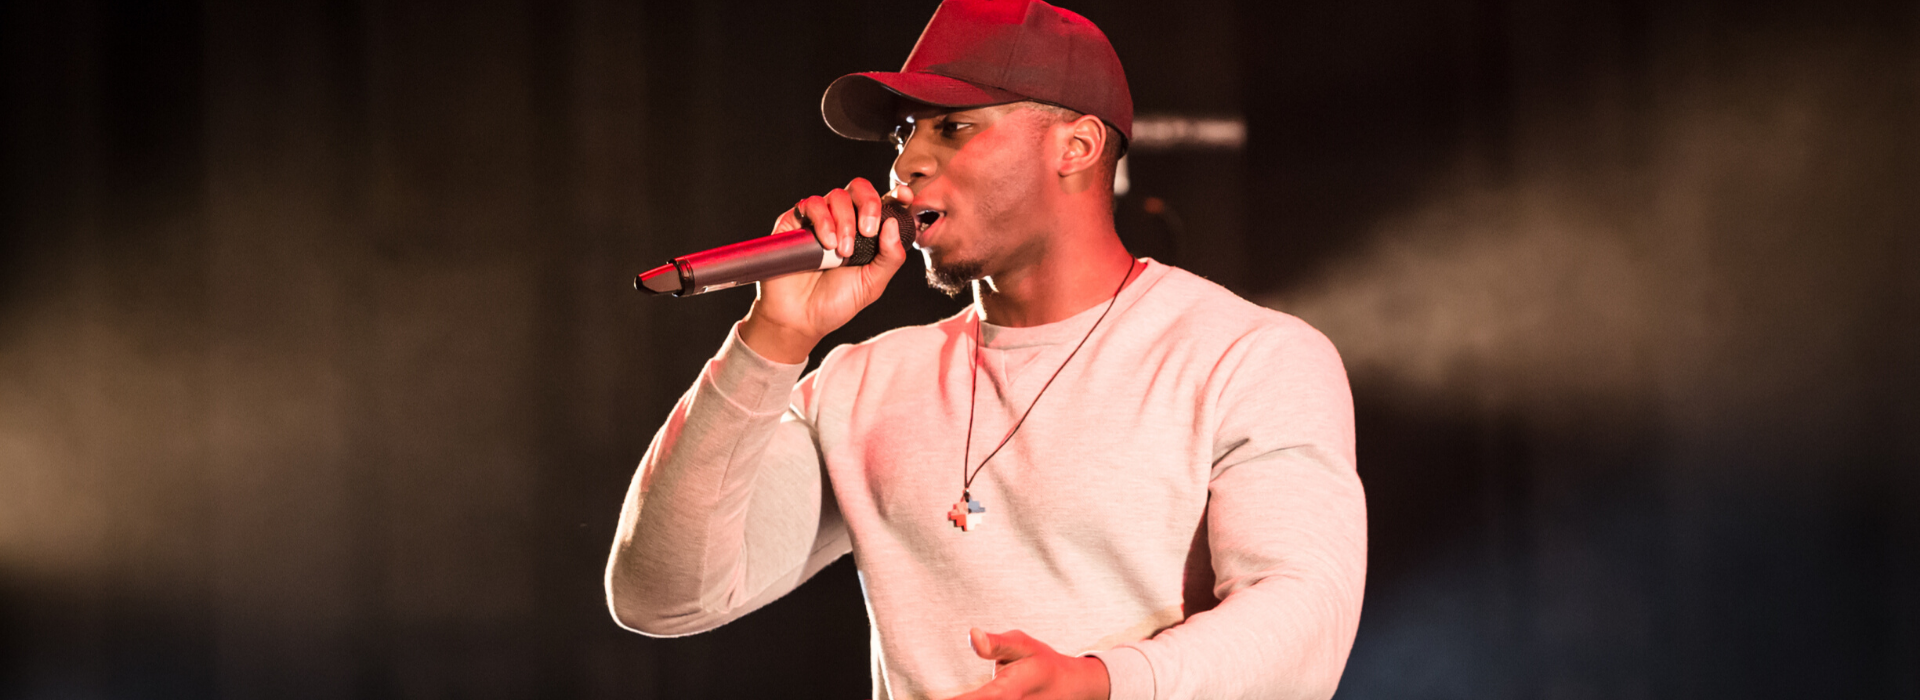 Monthly masterclasses participant performing at Stratford East. This image is of a young black male, wearing a long-sleeve t-shirt, chain and curved red cap. He is holding a microphone with his right hand. 